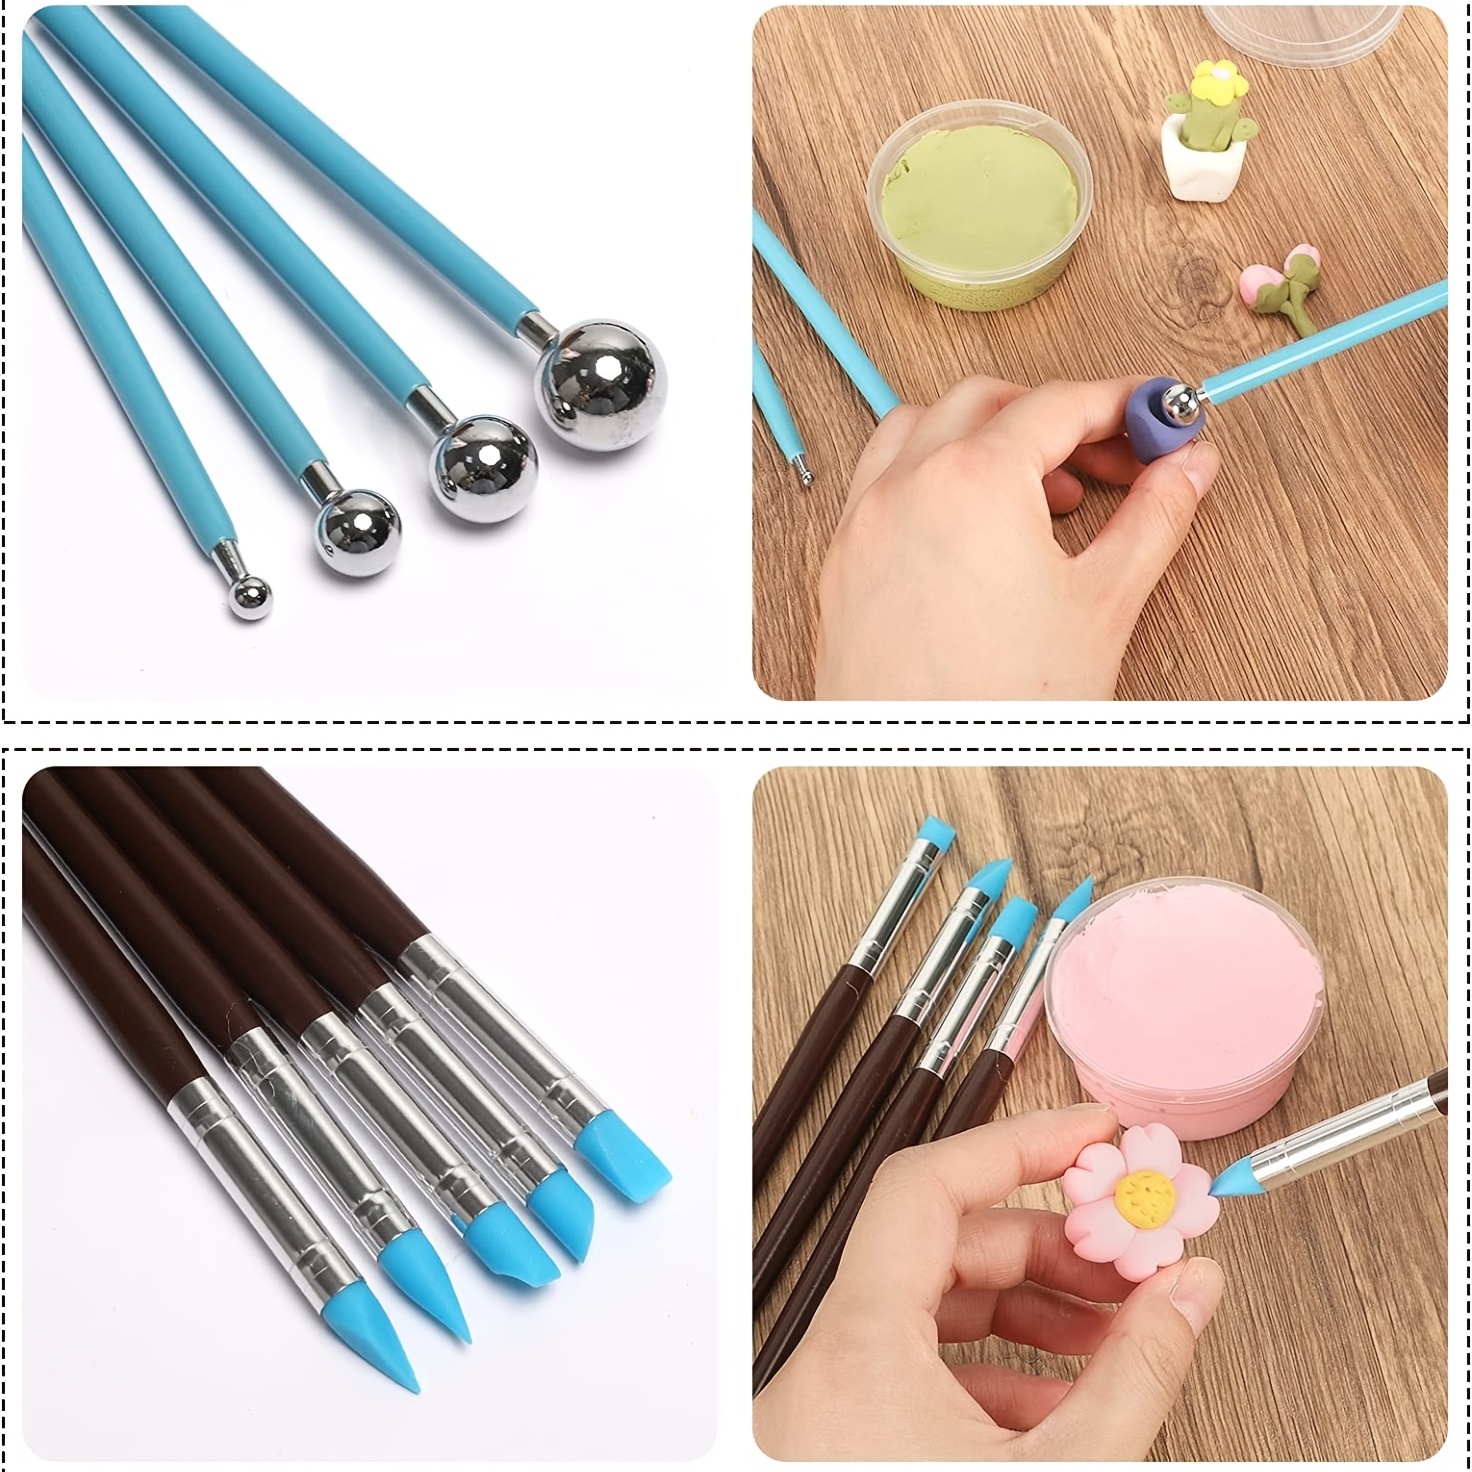 Cuteam 1 Set Pottery Tools Compound with 23 Pcs Pottery Tools Air-Dry Clay  Sculpting Tool Set All-Purpose Carving Shaping Cutting Scraping Brushing